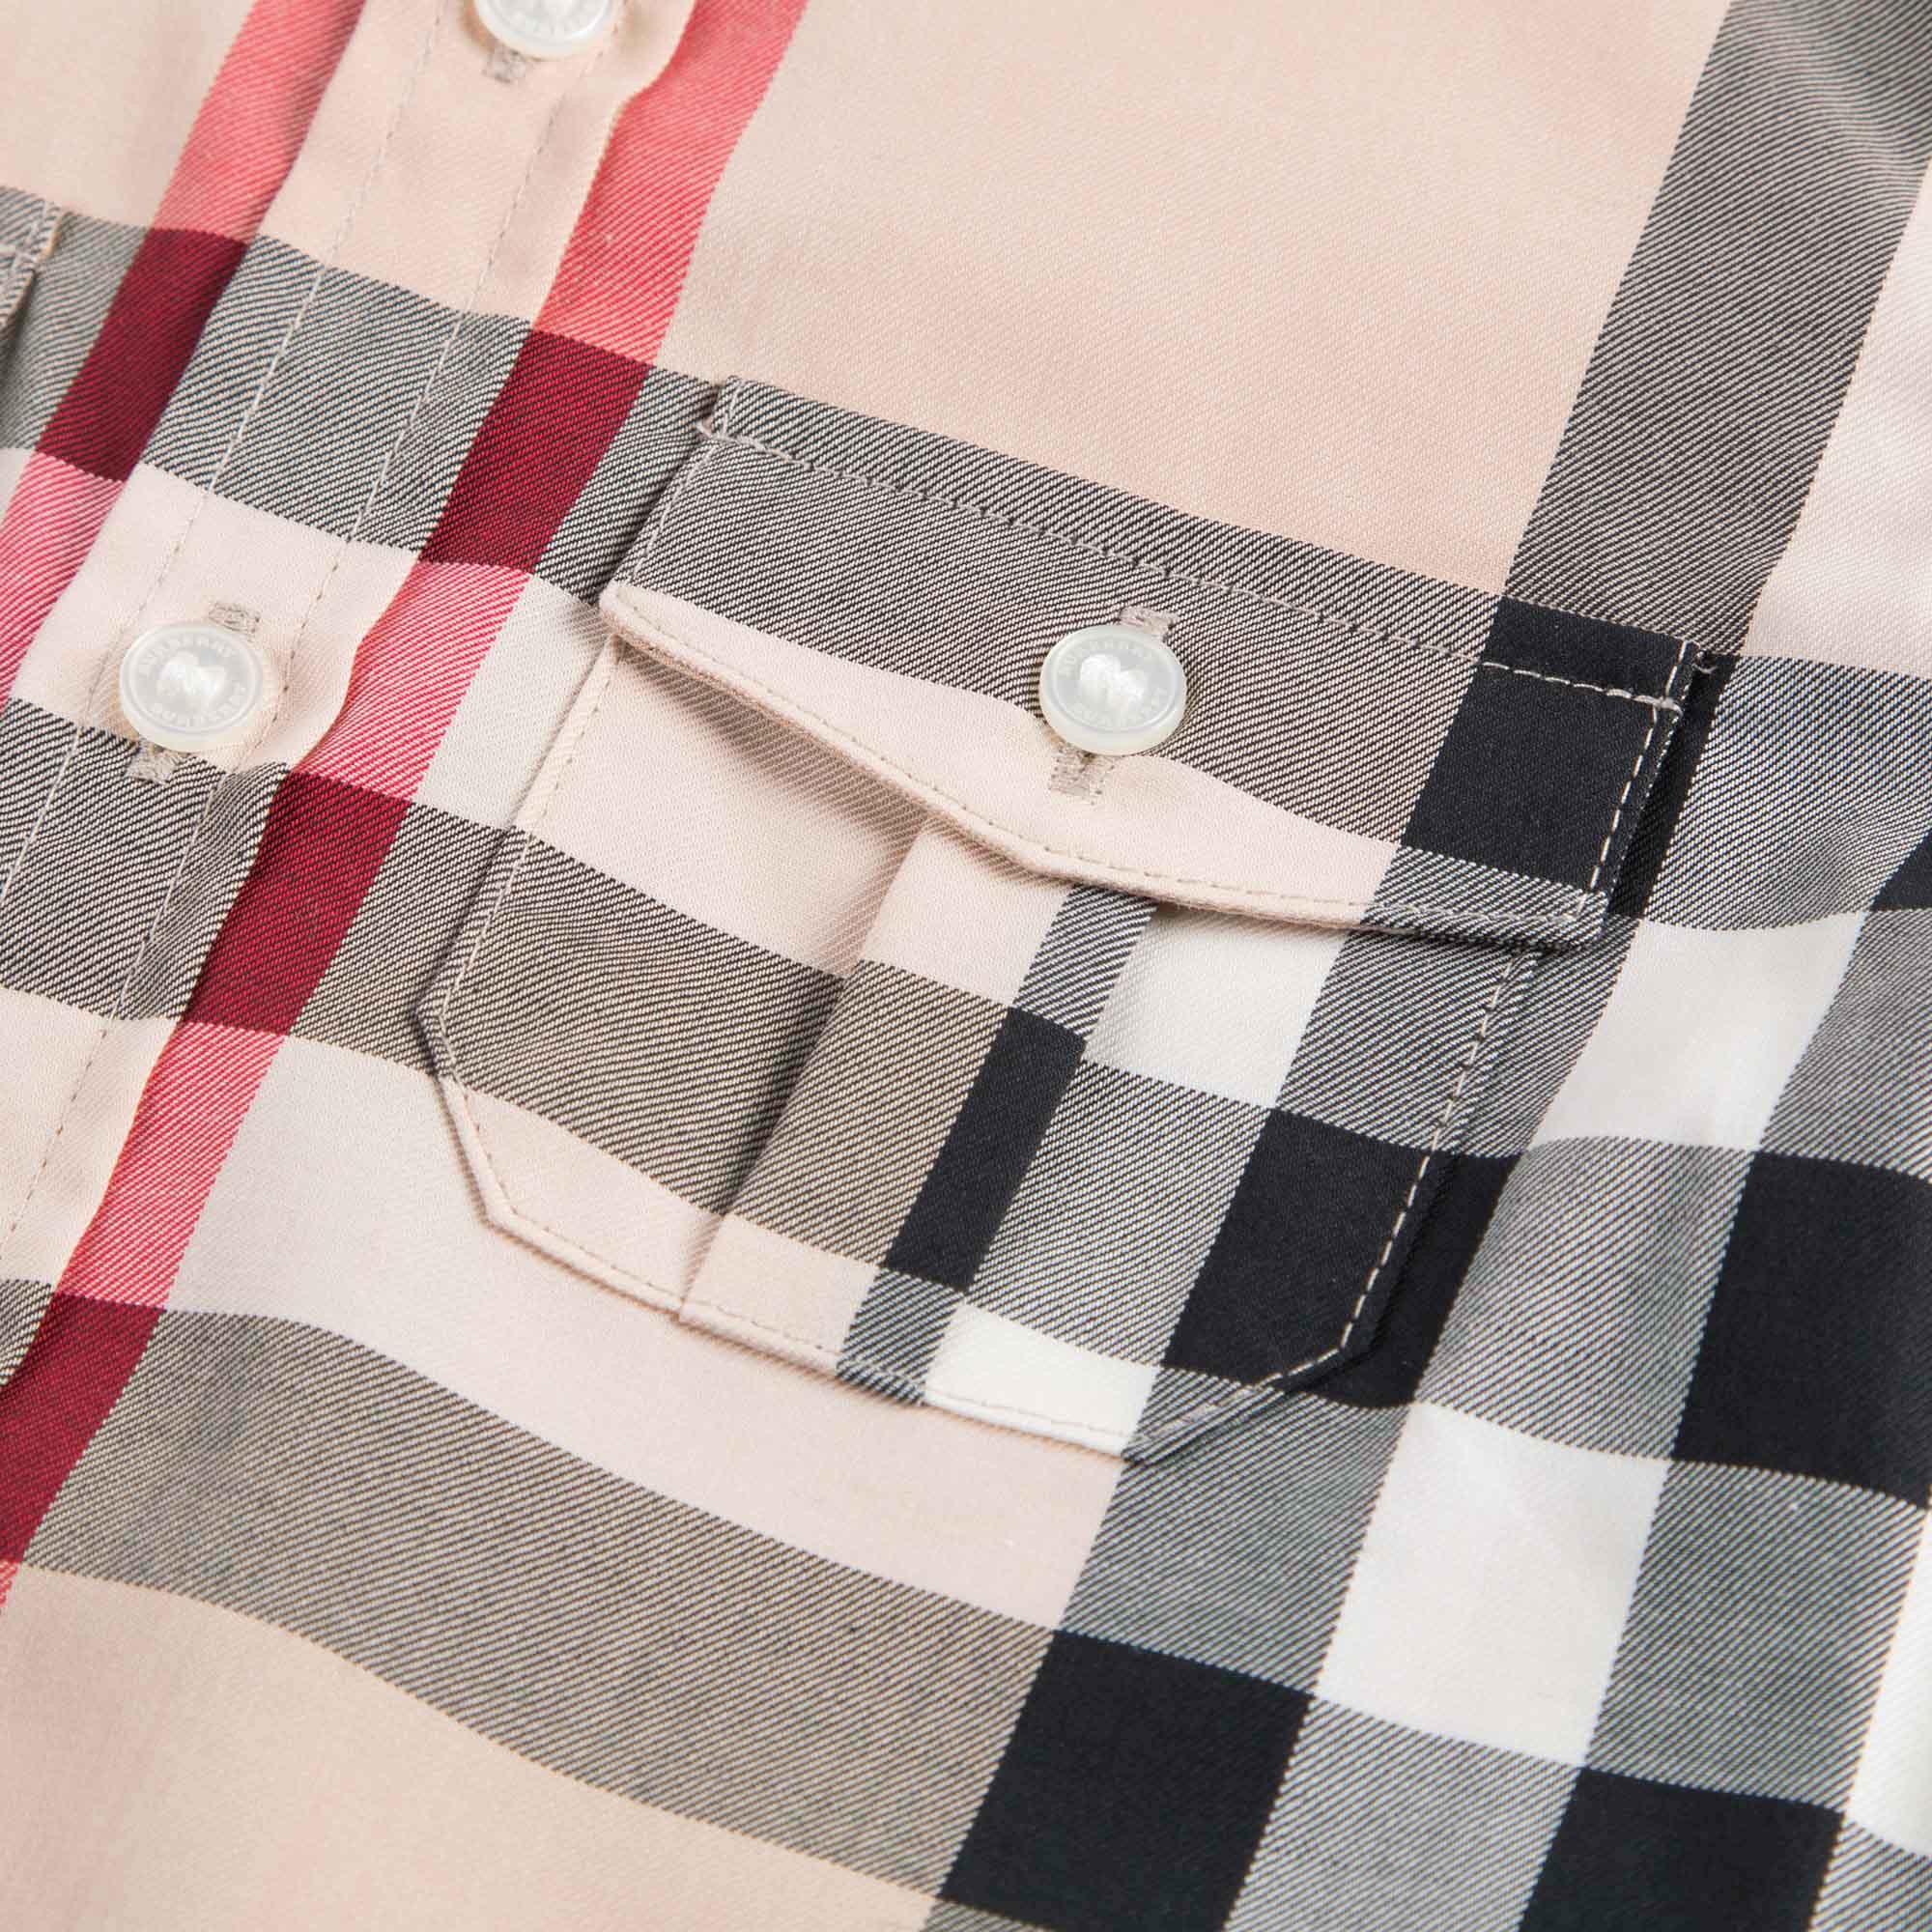 Baby Boys Classic Check Shirt With Pockets